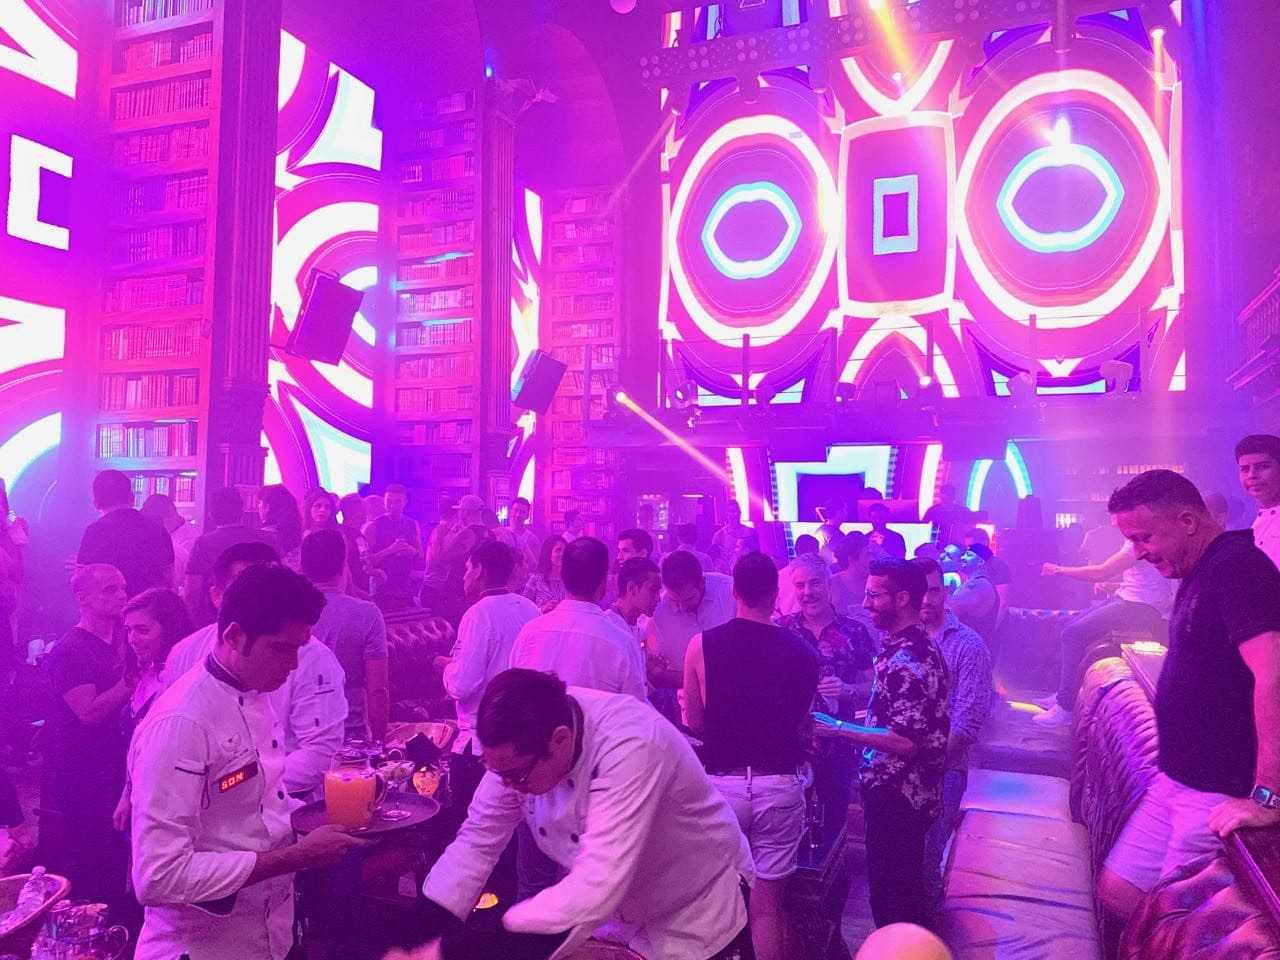 Co-De is a Mexican-owned gay club featuring an impressive $2 million sound and lighting system.